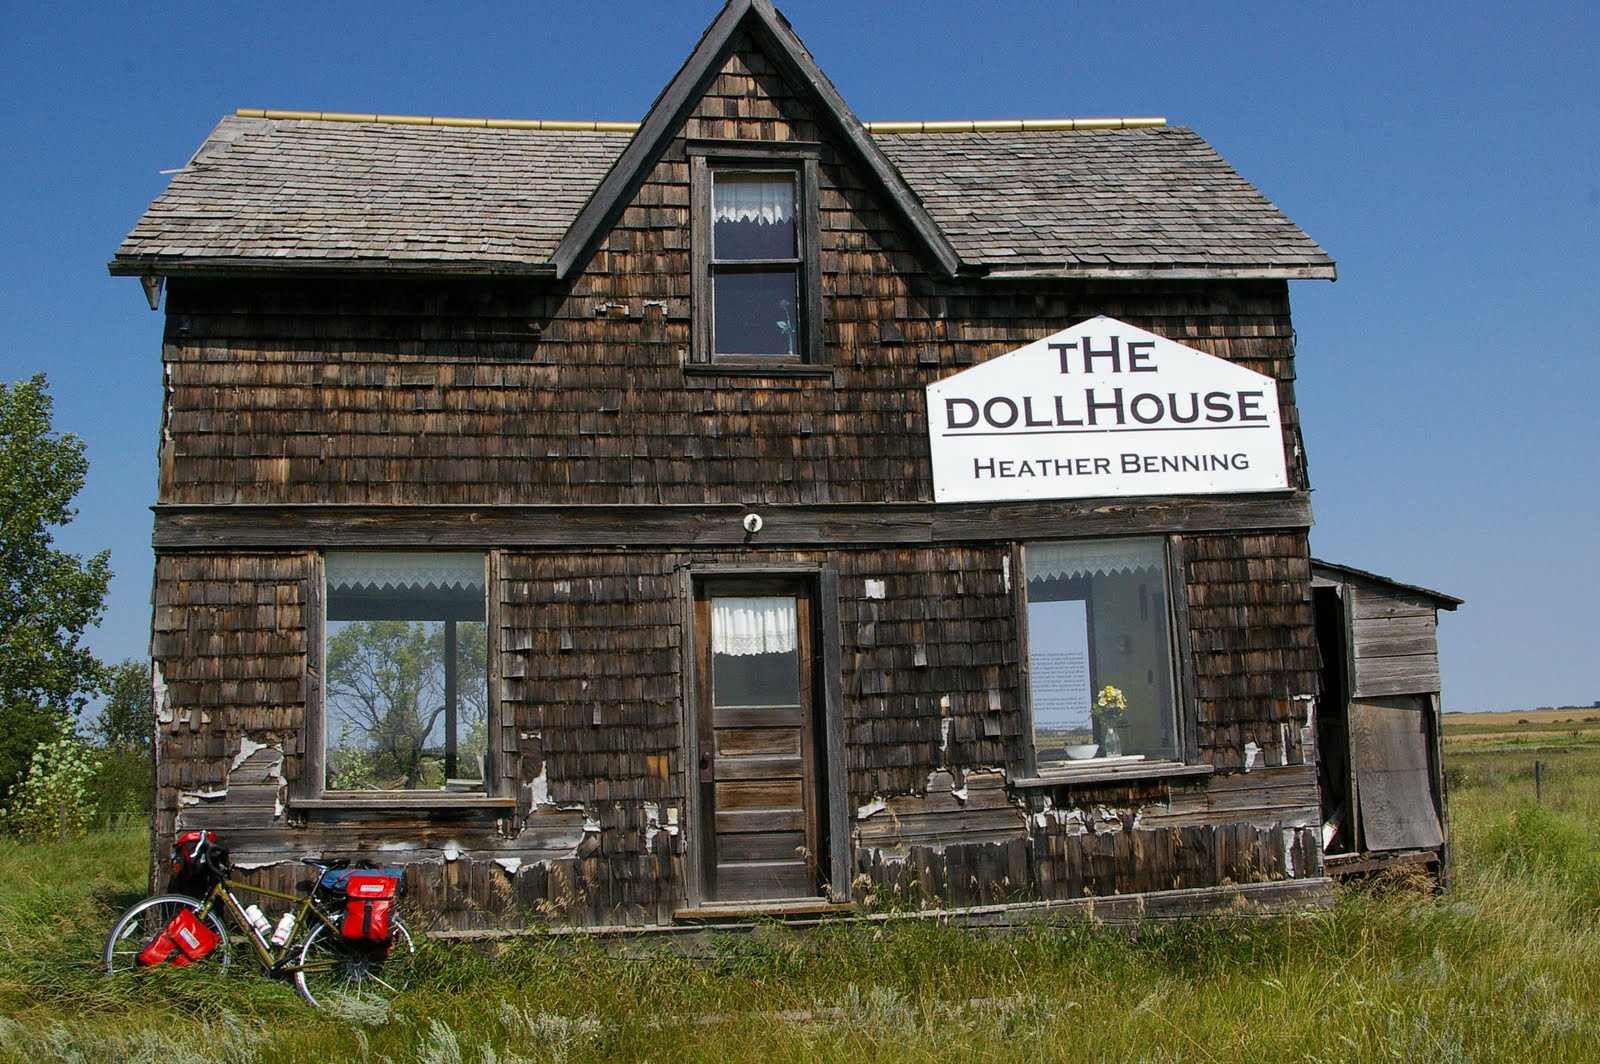 The abandoned house that became 'The Dollhouse'